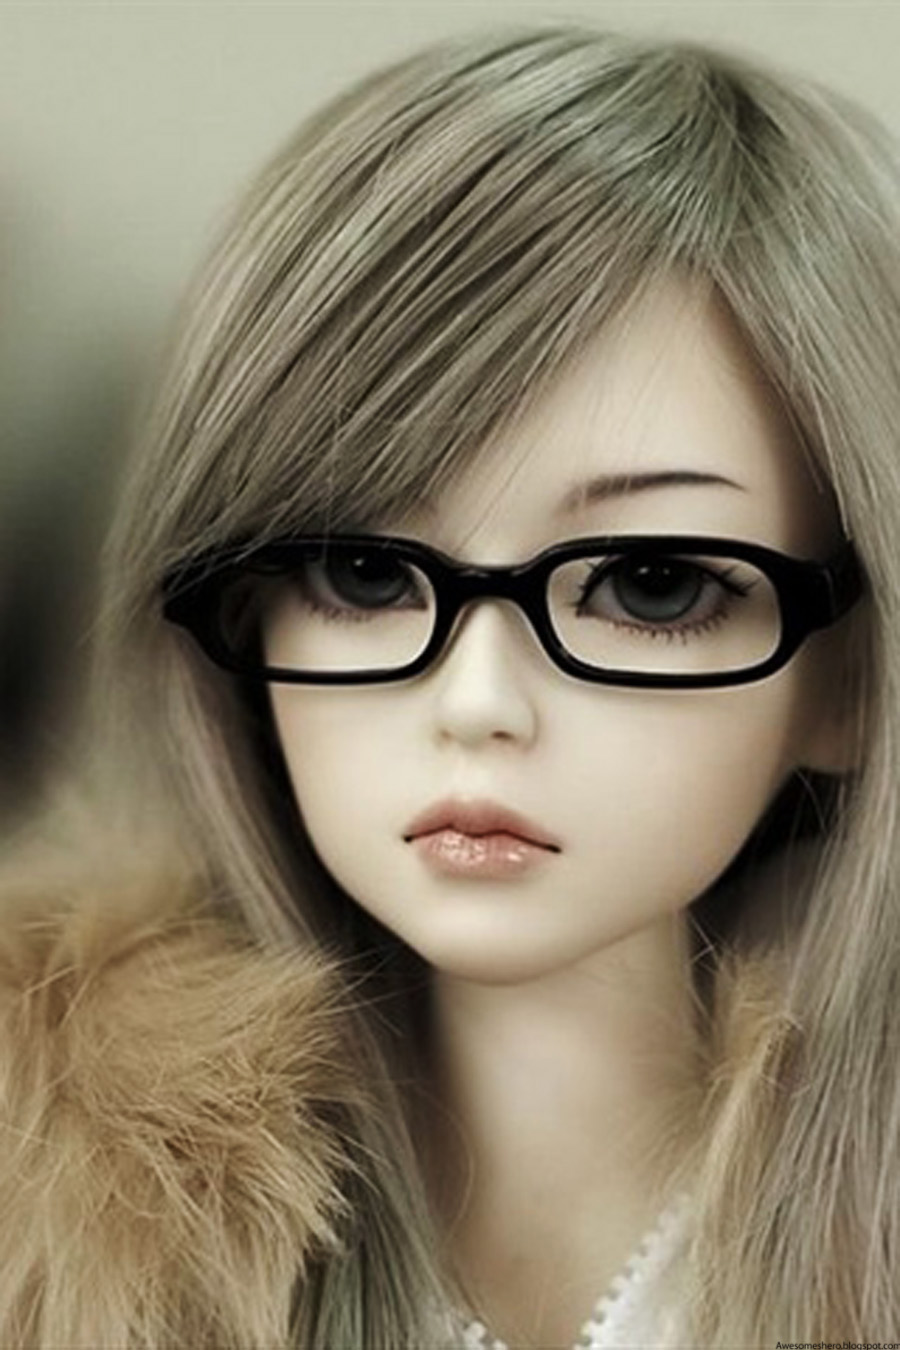 Cute dolls wallpapers free download